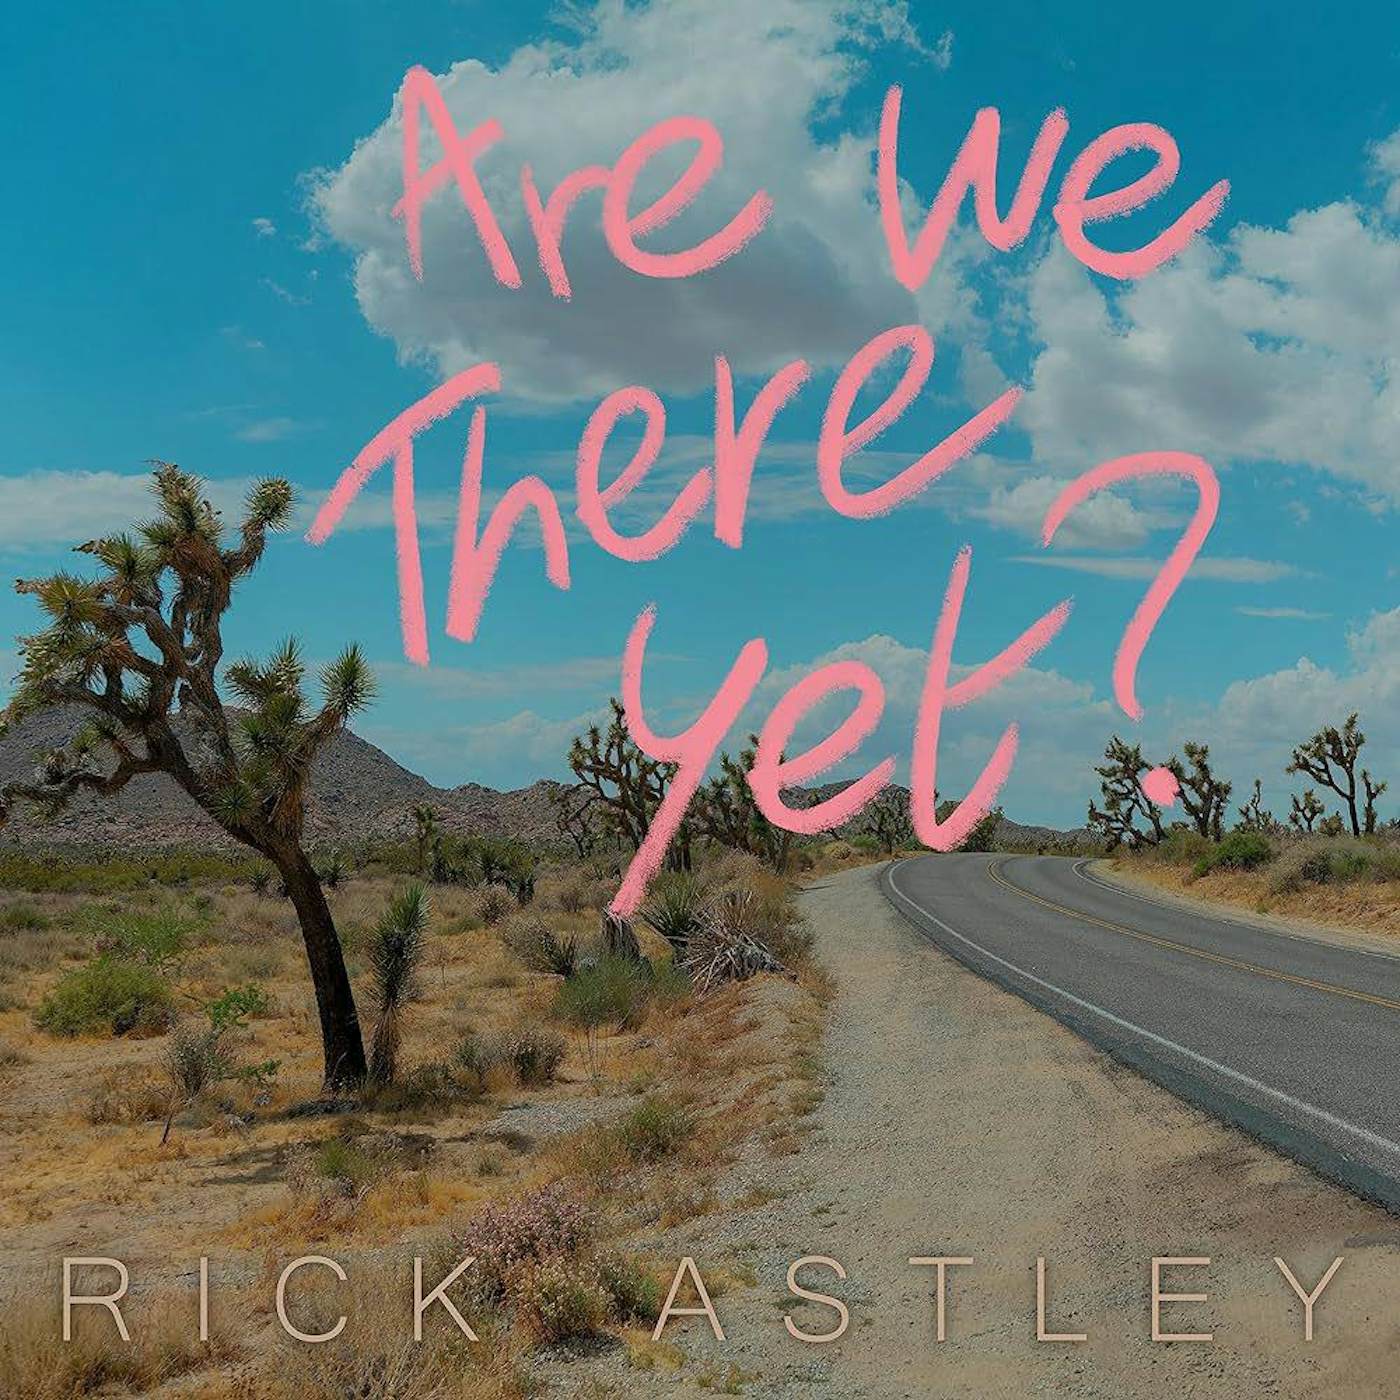 Rick Astley Are We There Yet? (Limited/Color) Vinyl Record